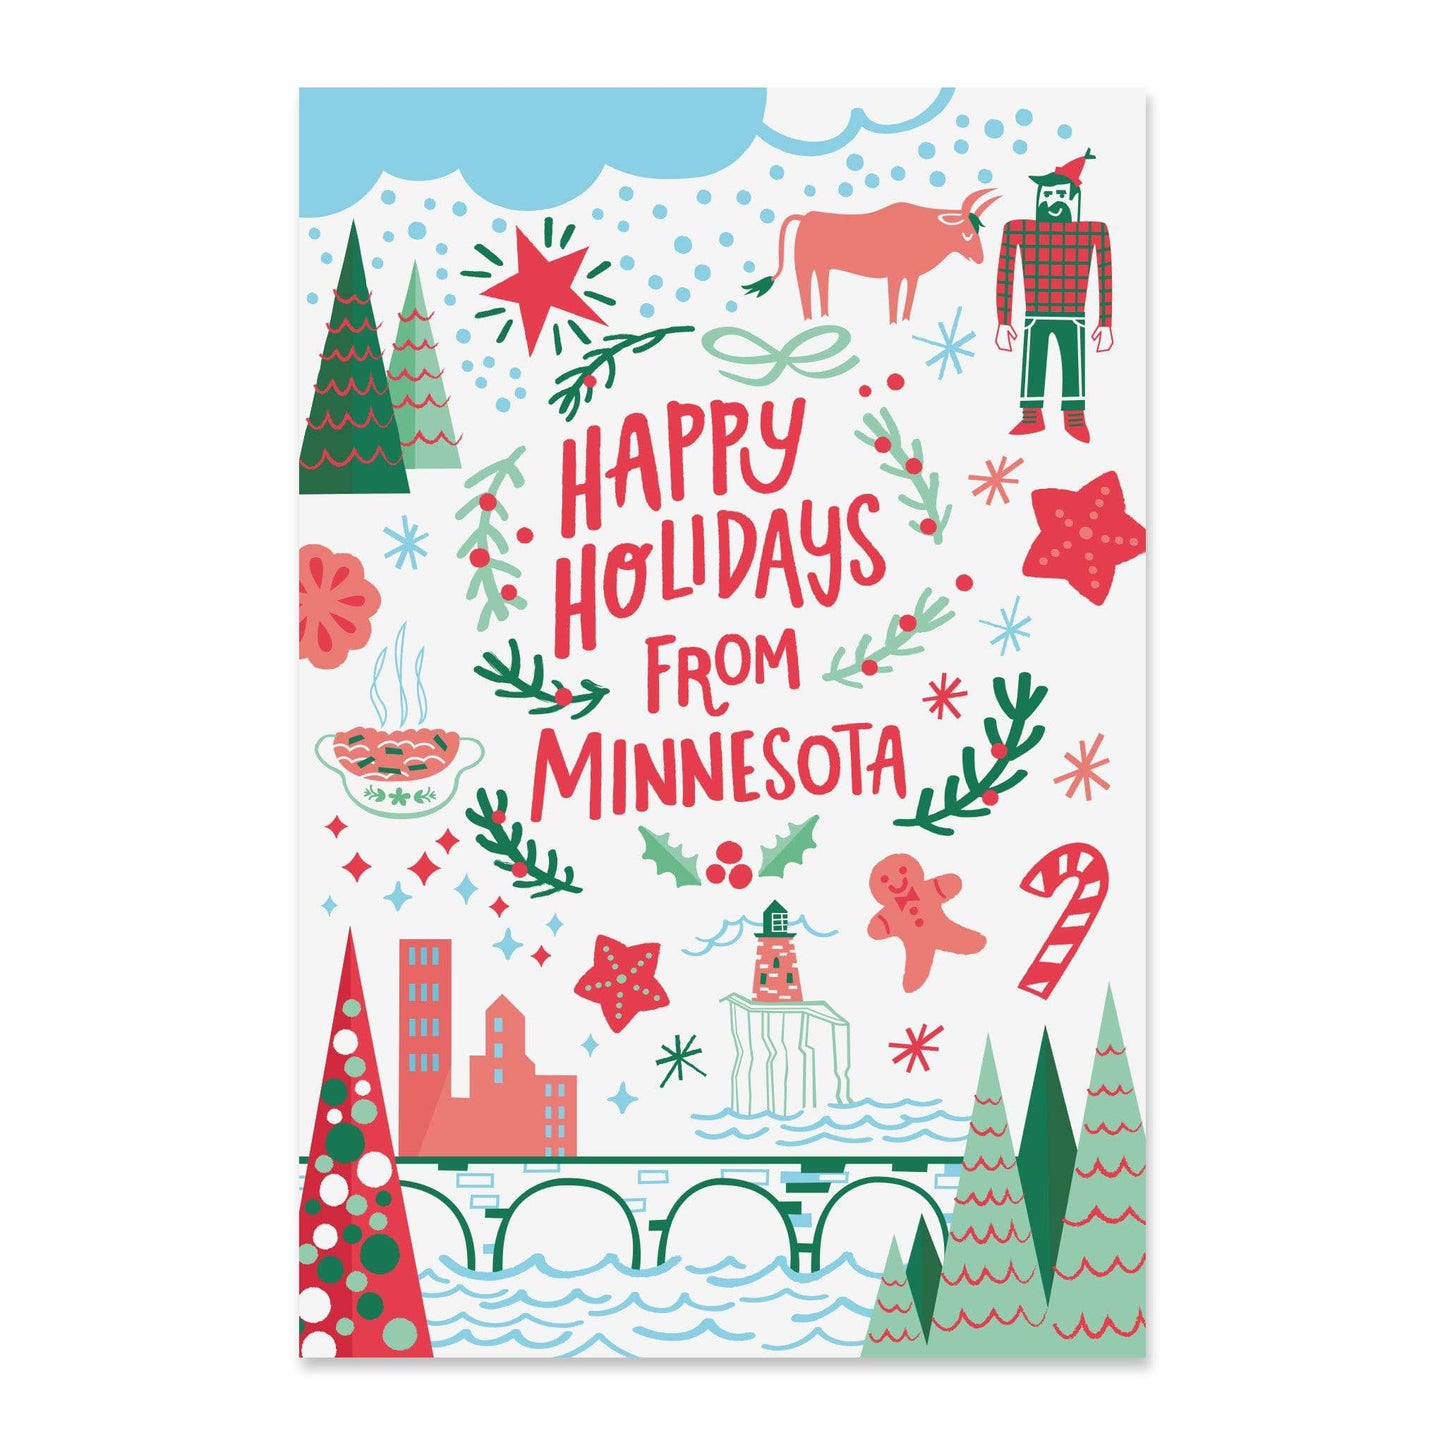 Christmas colored and inspired happy holiday from minnesota card.  